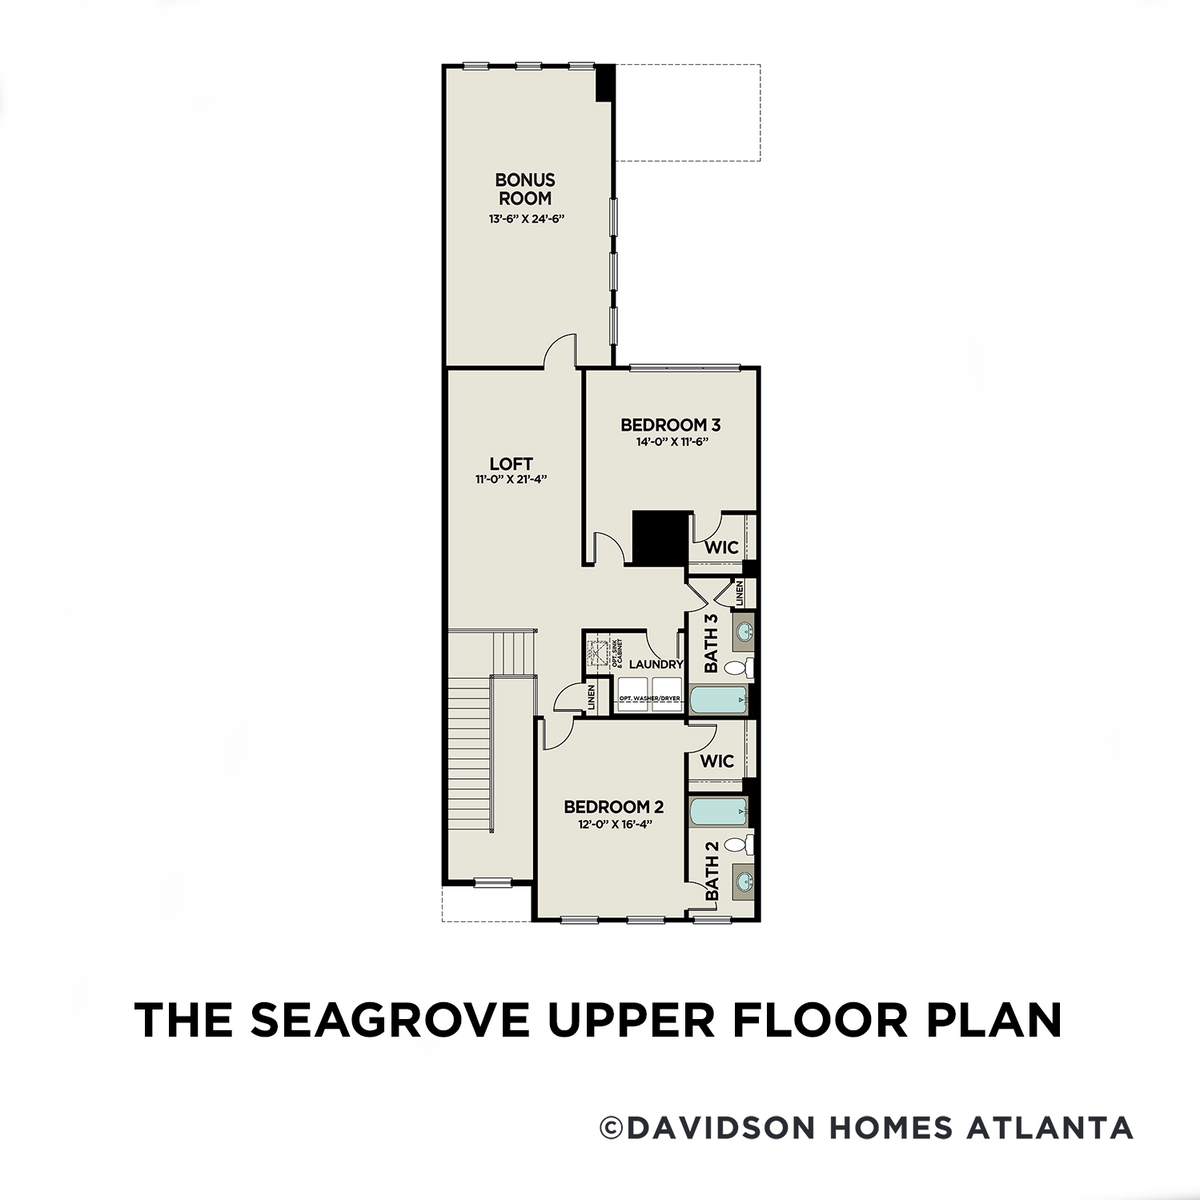 2 - The Seagrove C floor plan layout for 736 Stickley Oak Way in Davidson Homes' The Village at Towne Lake community.